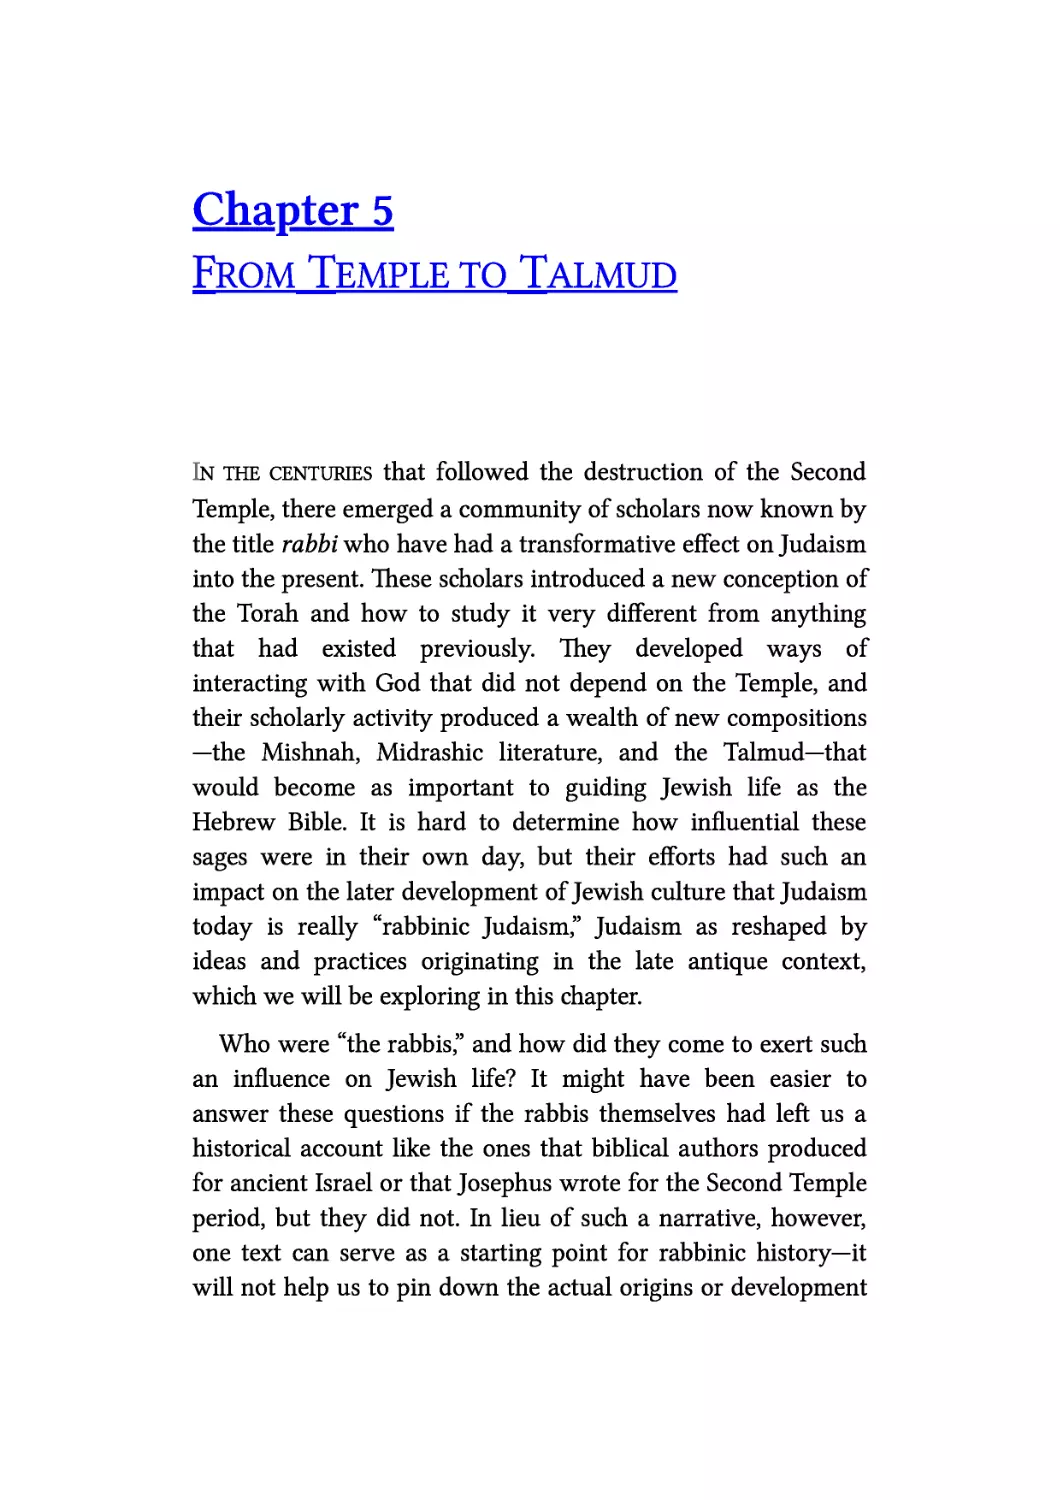 5. From Temple to Talmud